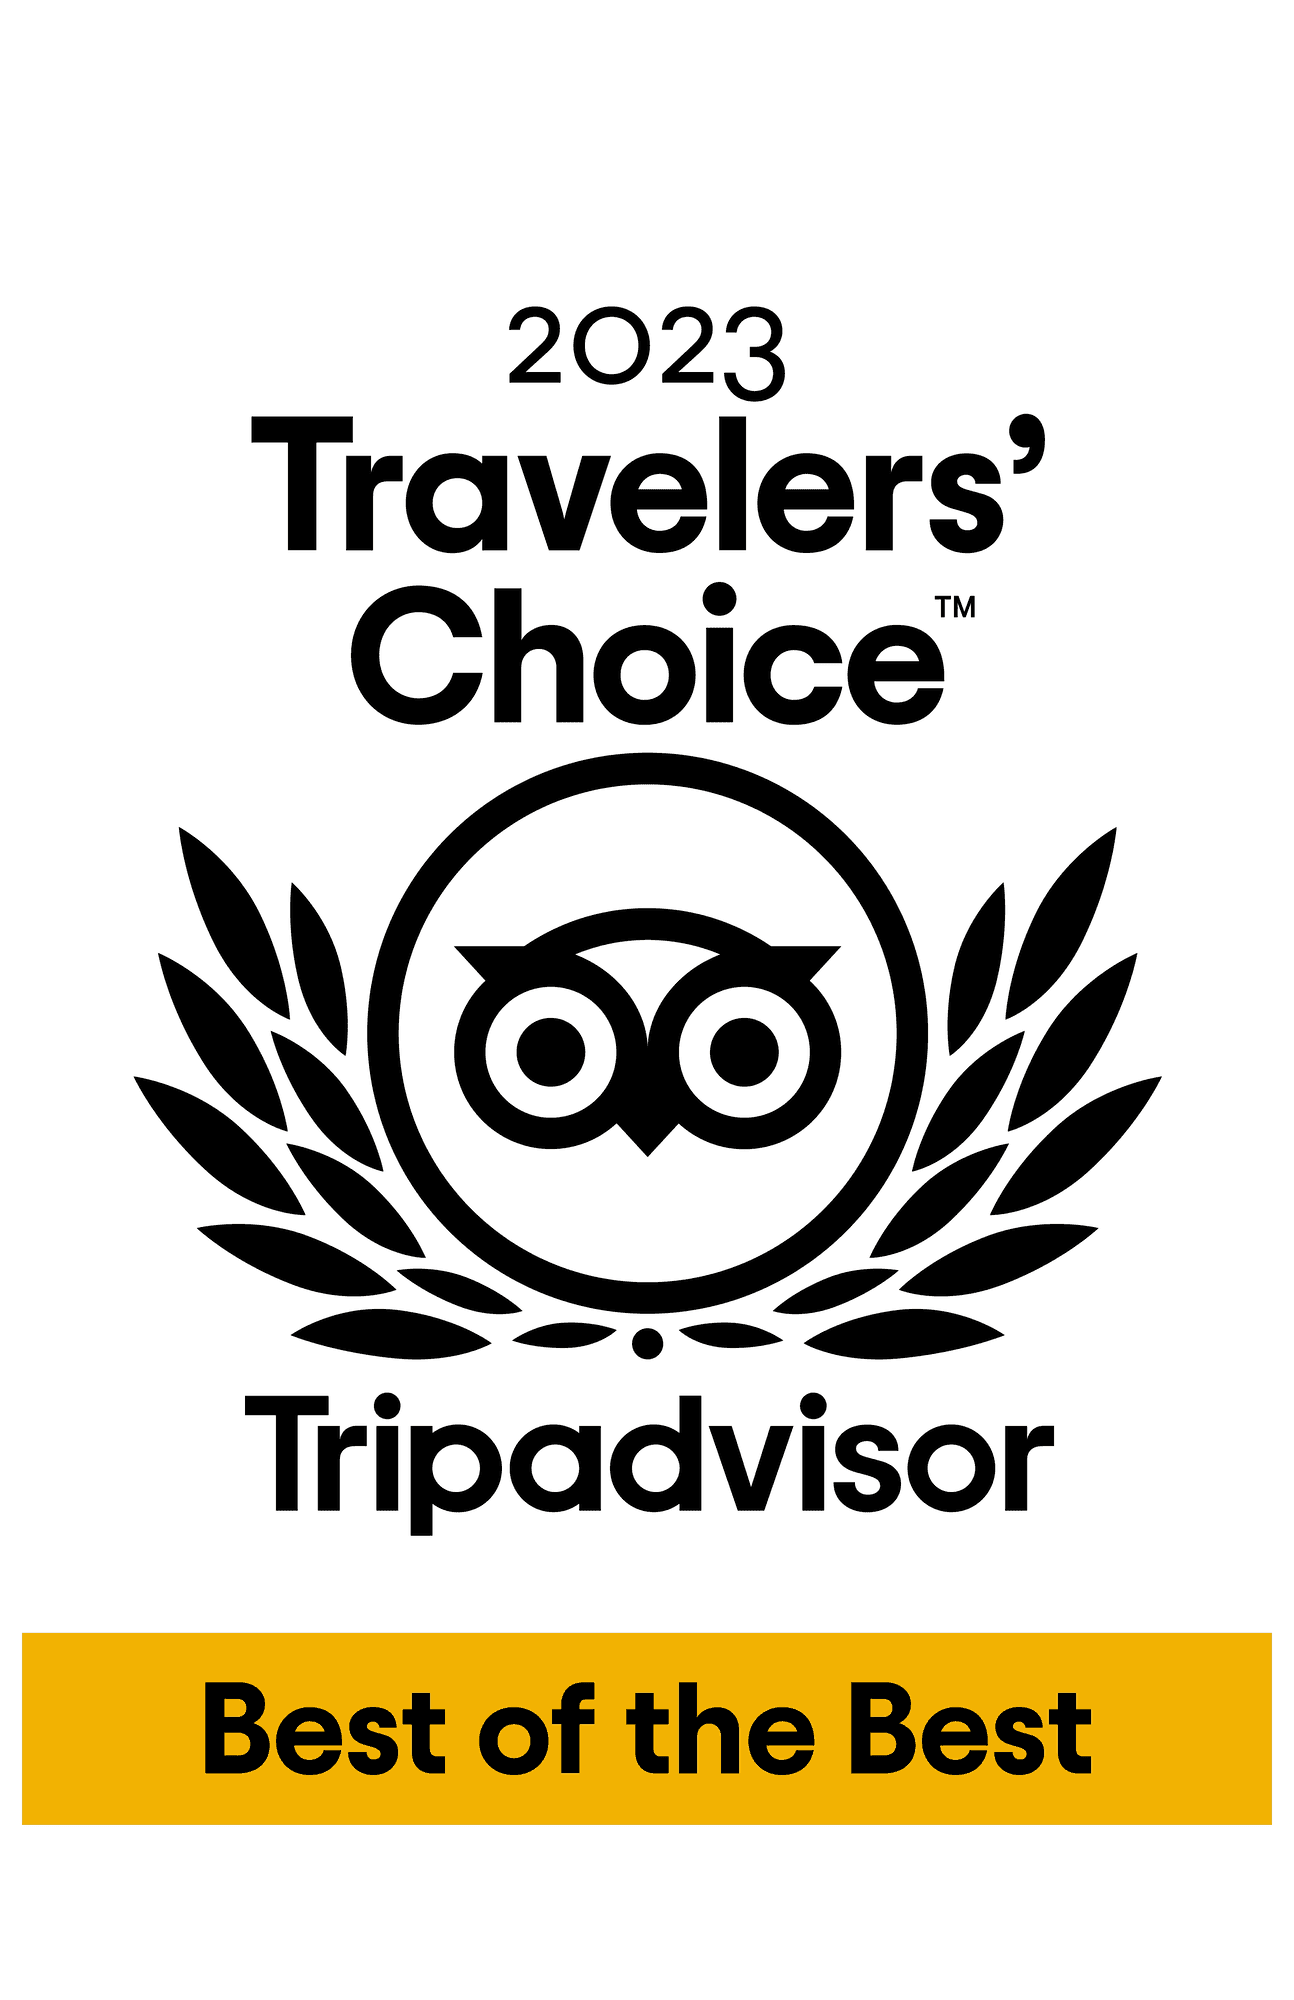 Logo of 2023 Travelers Choice used at Hideaway Rio Celeste